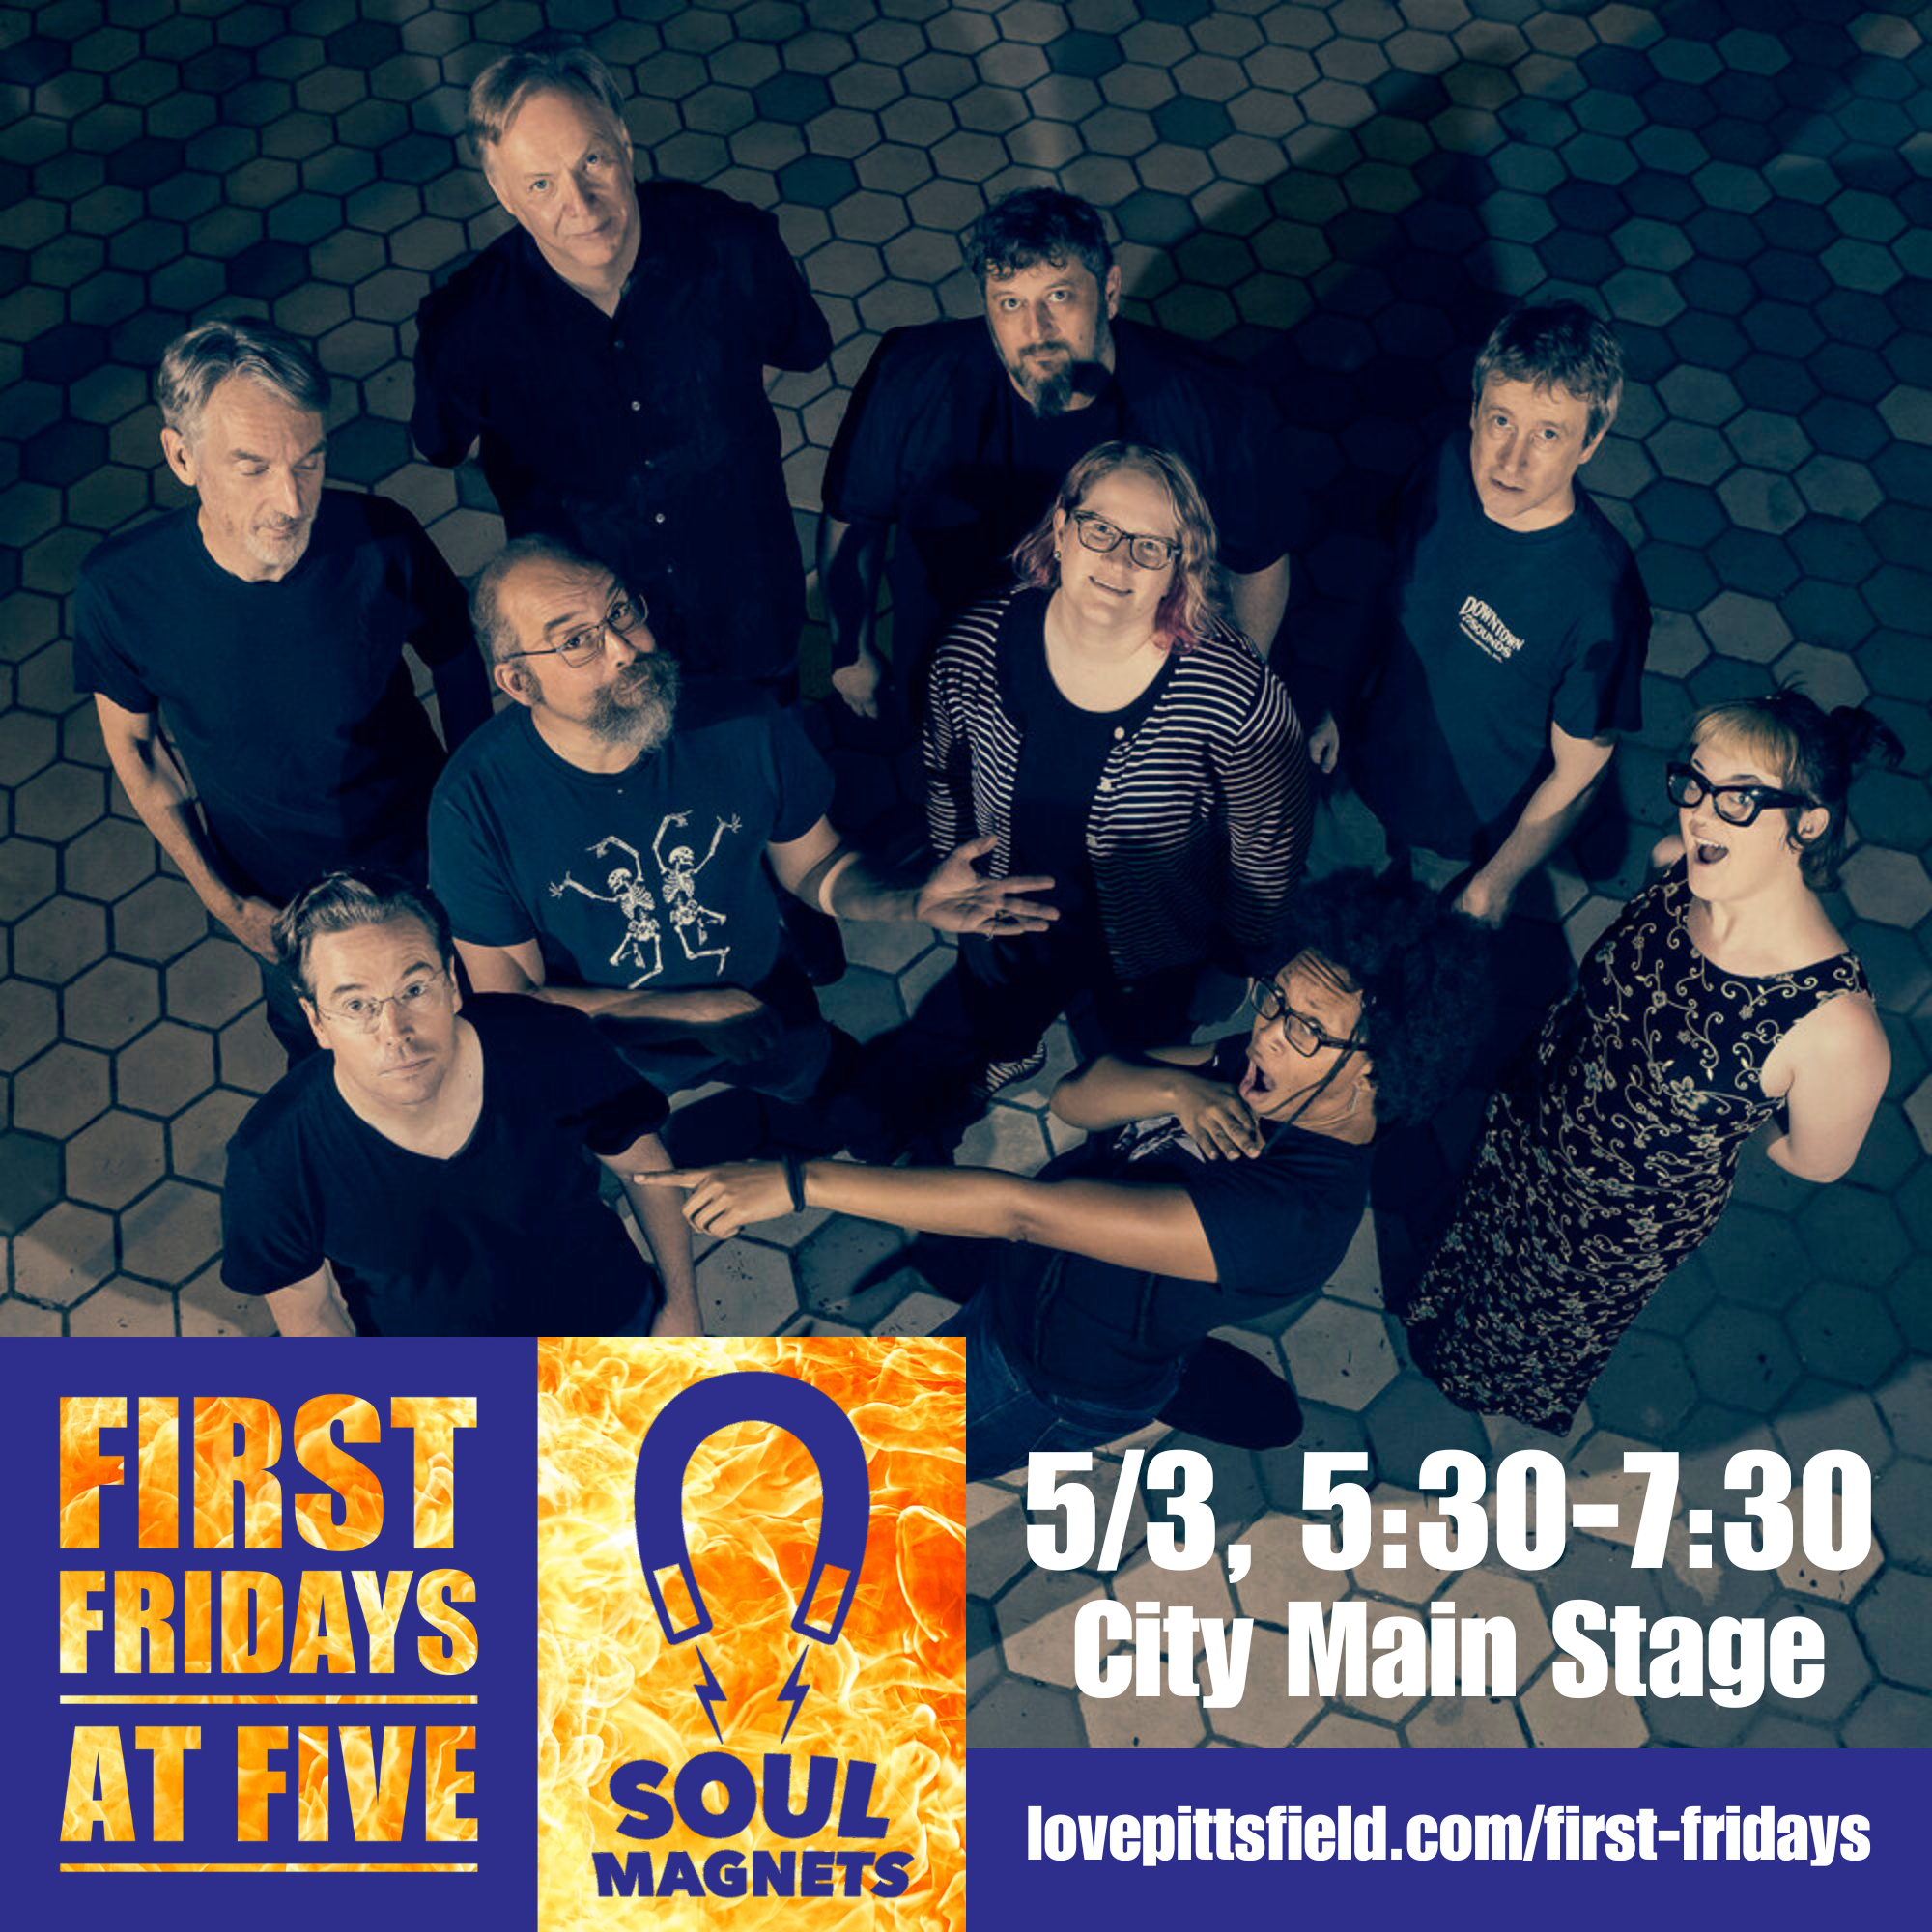 Soul Magnets First Fridays at Five